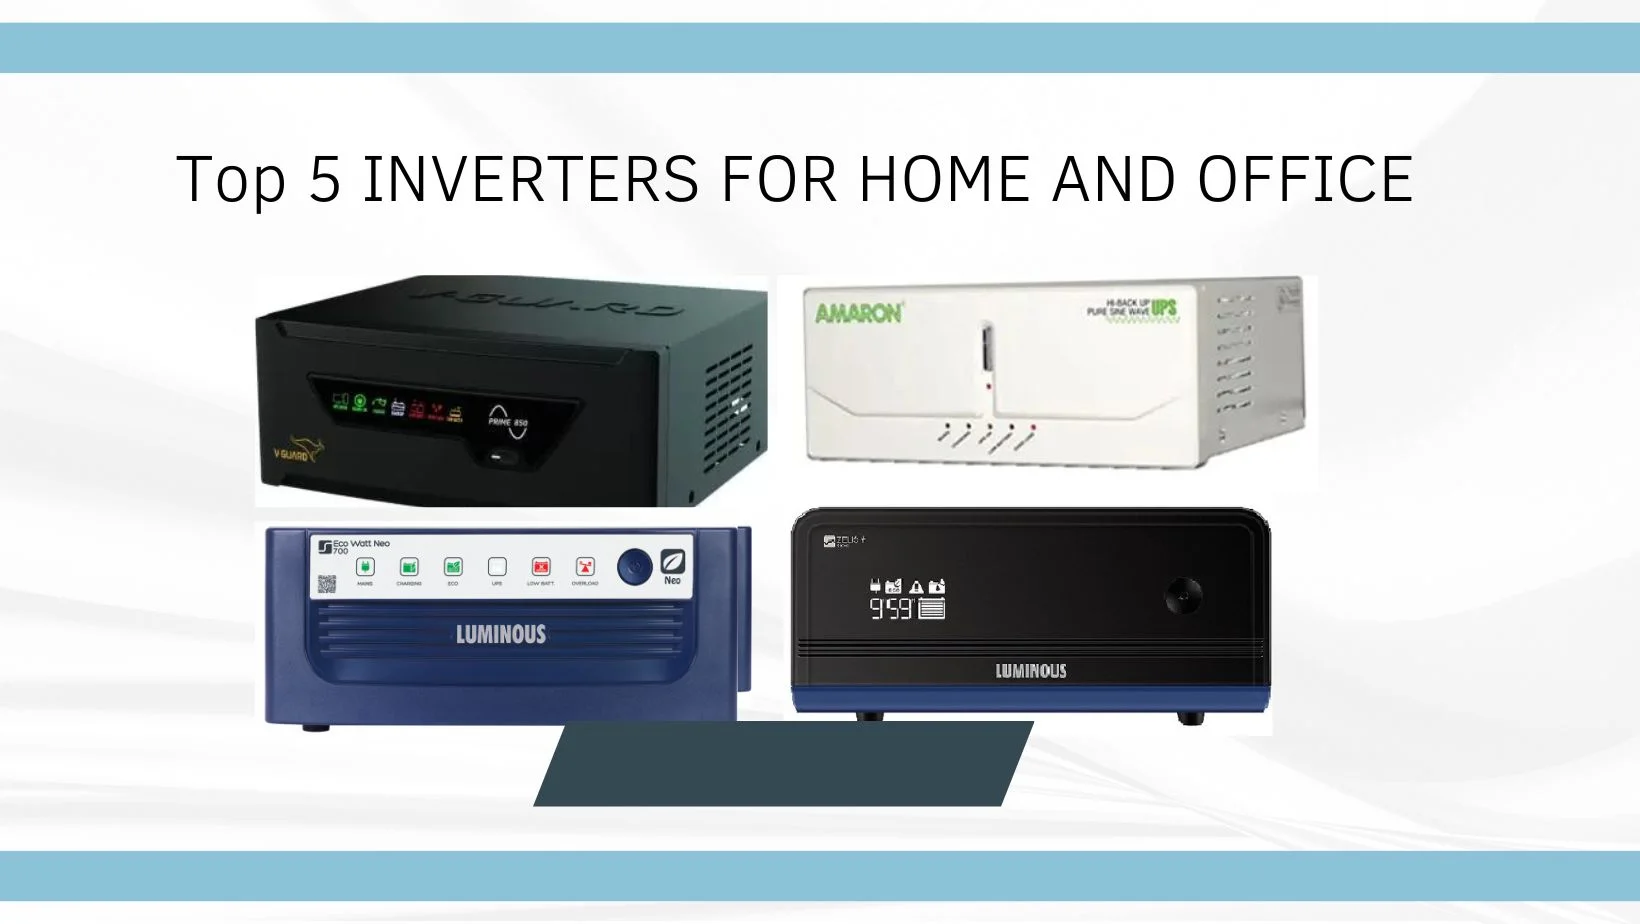 Top 5 INVERTERS FOR HOME AND OFFICE